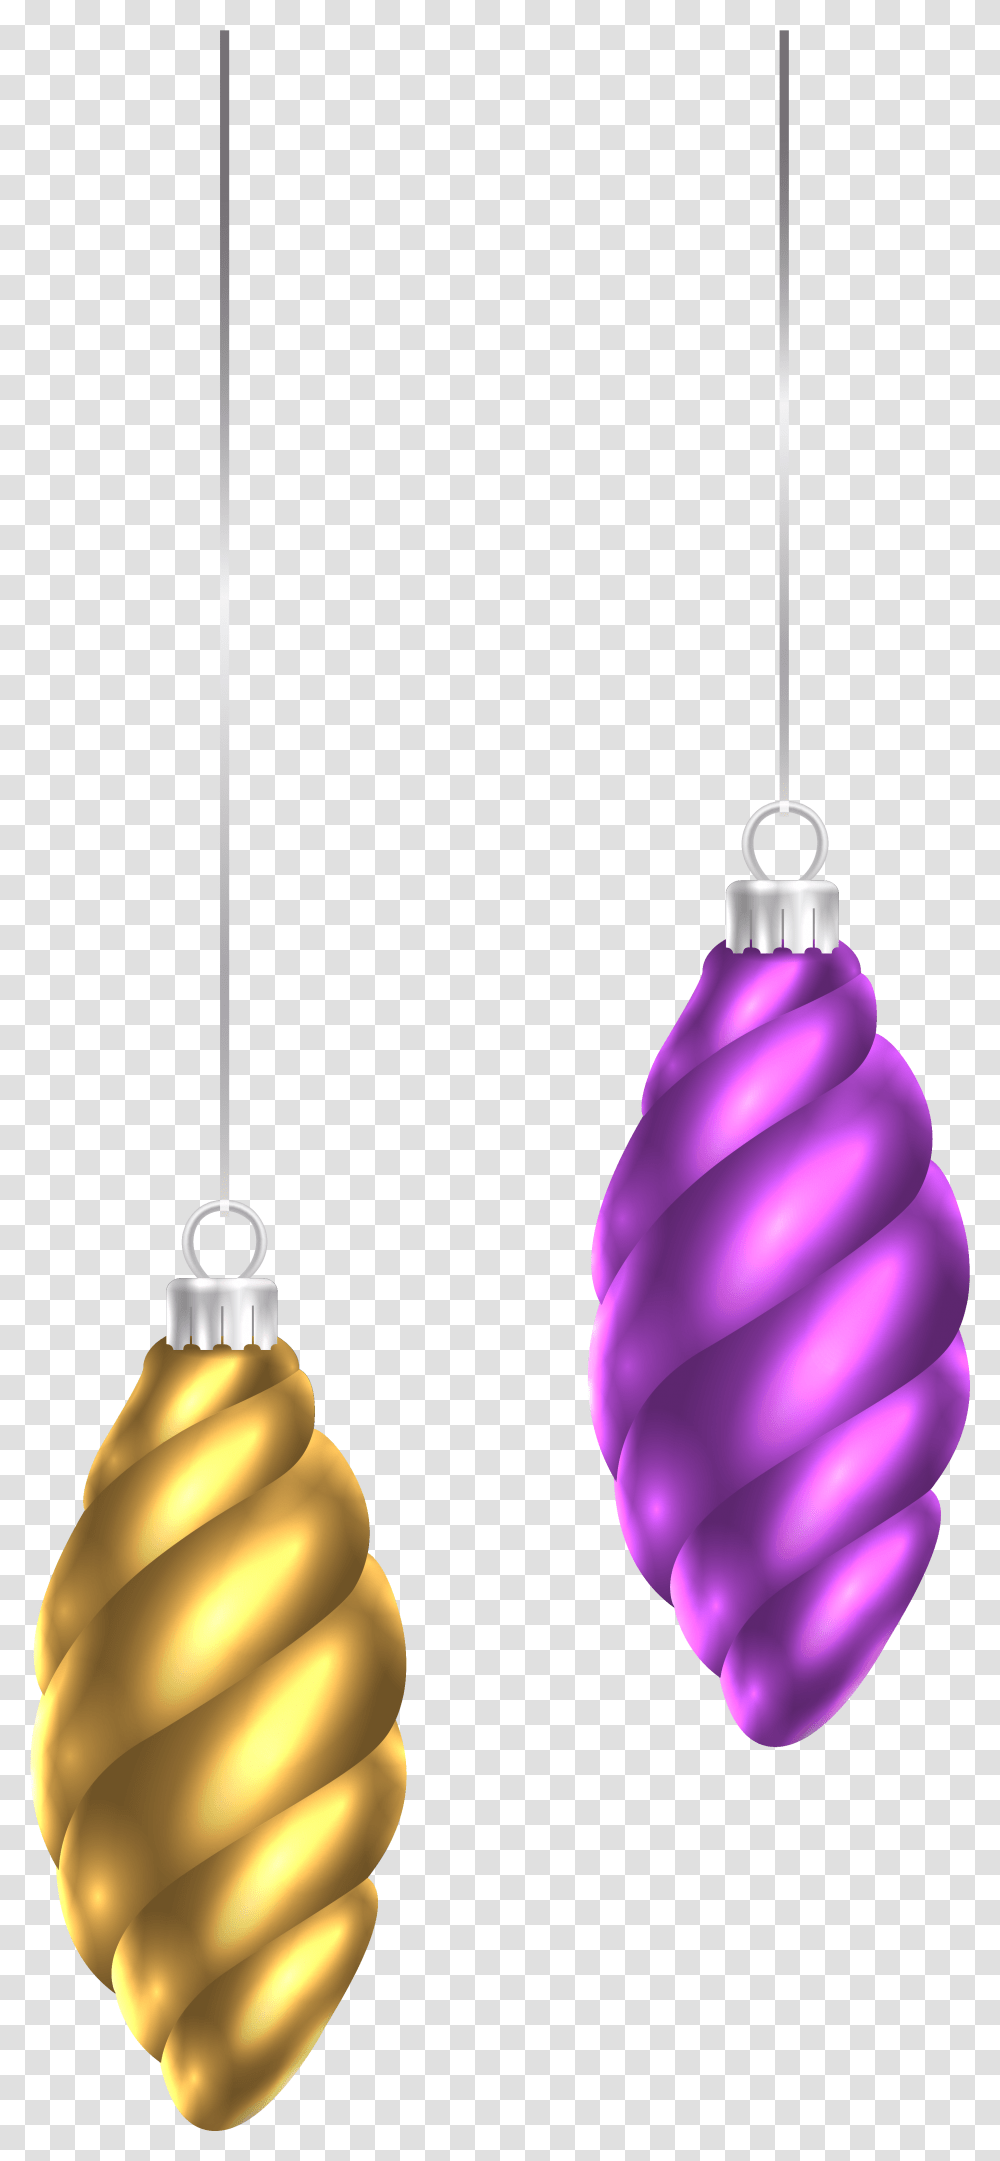 Christmas Ornaments Clip Art Image Ornaments, Crystal, Injection Transparent Png